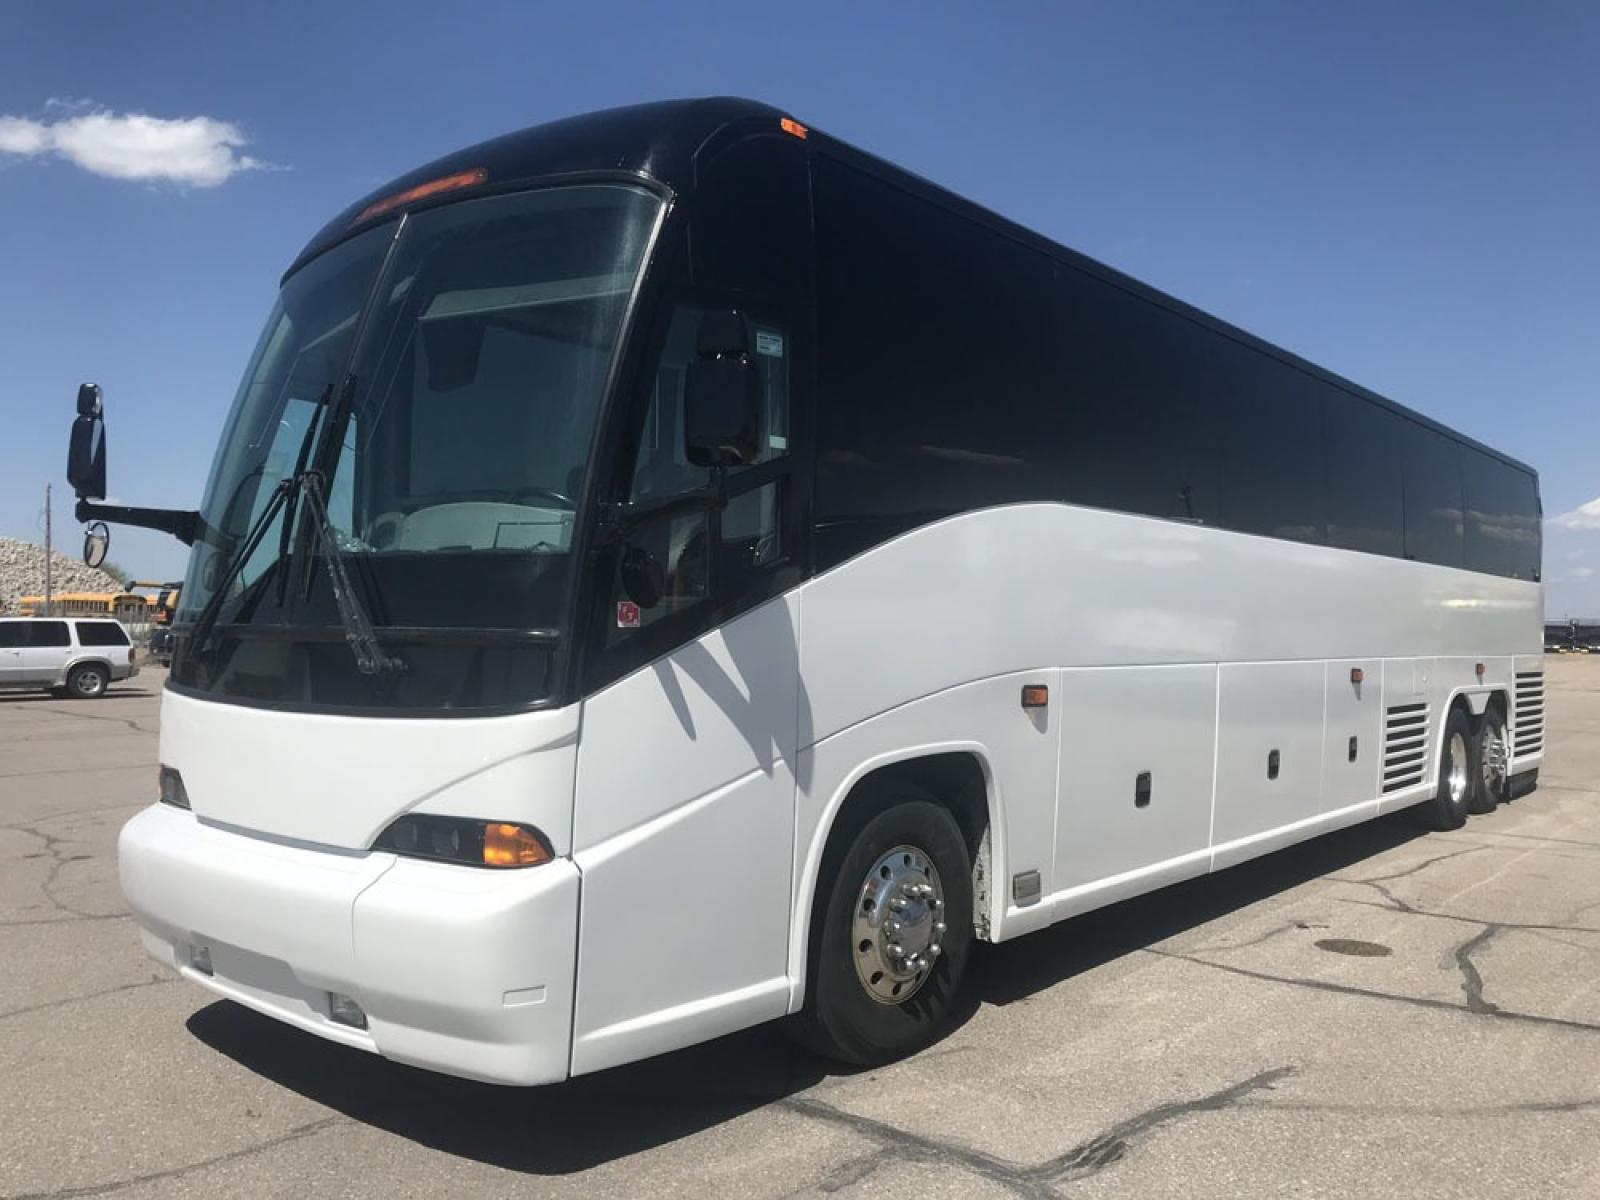 2008 White MCI J4500 with an Cummins ISM engine, ZF AUTO transmission, 0.000000, 0.000000 - 2008 MCI J4500 - Cummins ISM Diesel Engine - ZF Auto Trans. - 45' -- 56 Passengers -- Seat Belts - Flat Screens and DVD - Aluminum Wheels - Enclosed parcel racks – Restroom - Photo #0